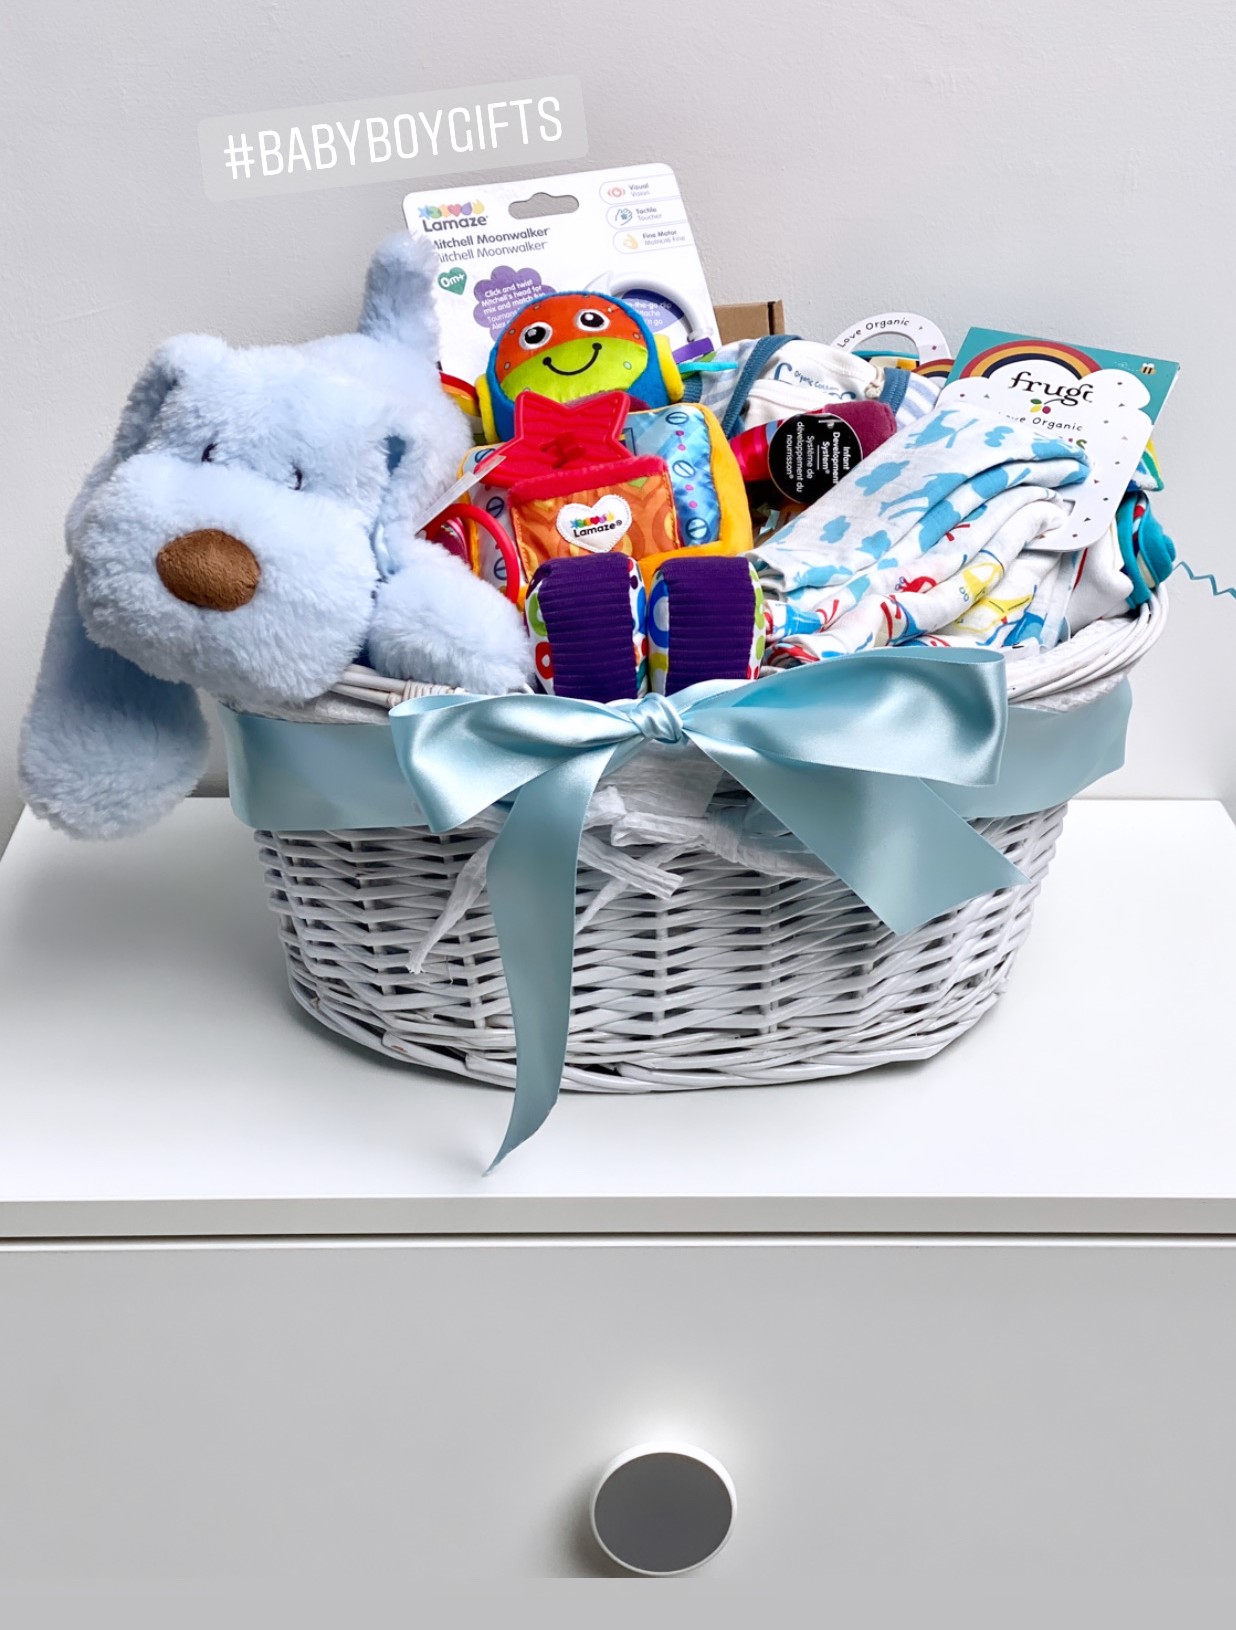 Luxury Baby Boy Gifts by Basketsgalore